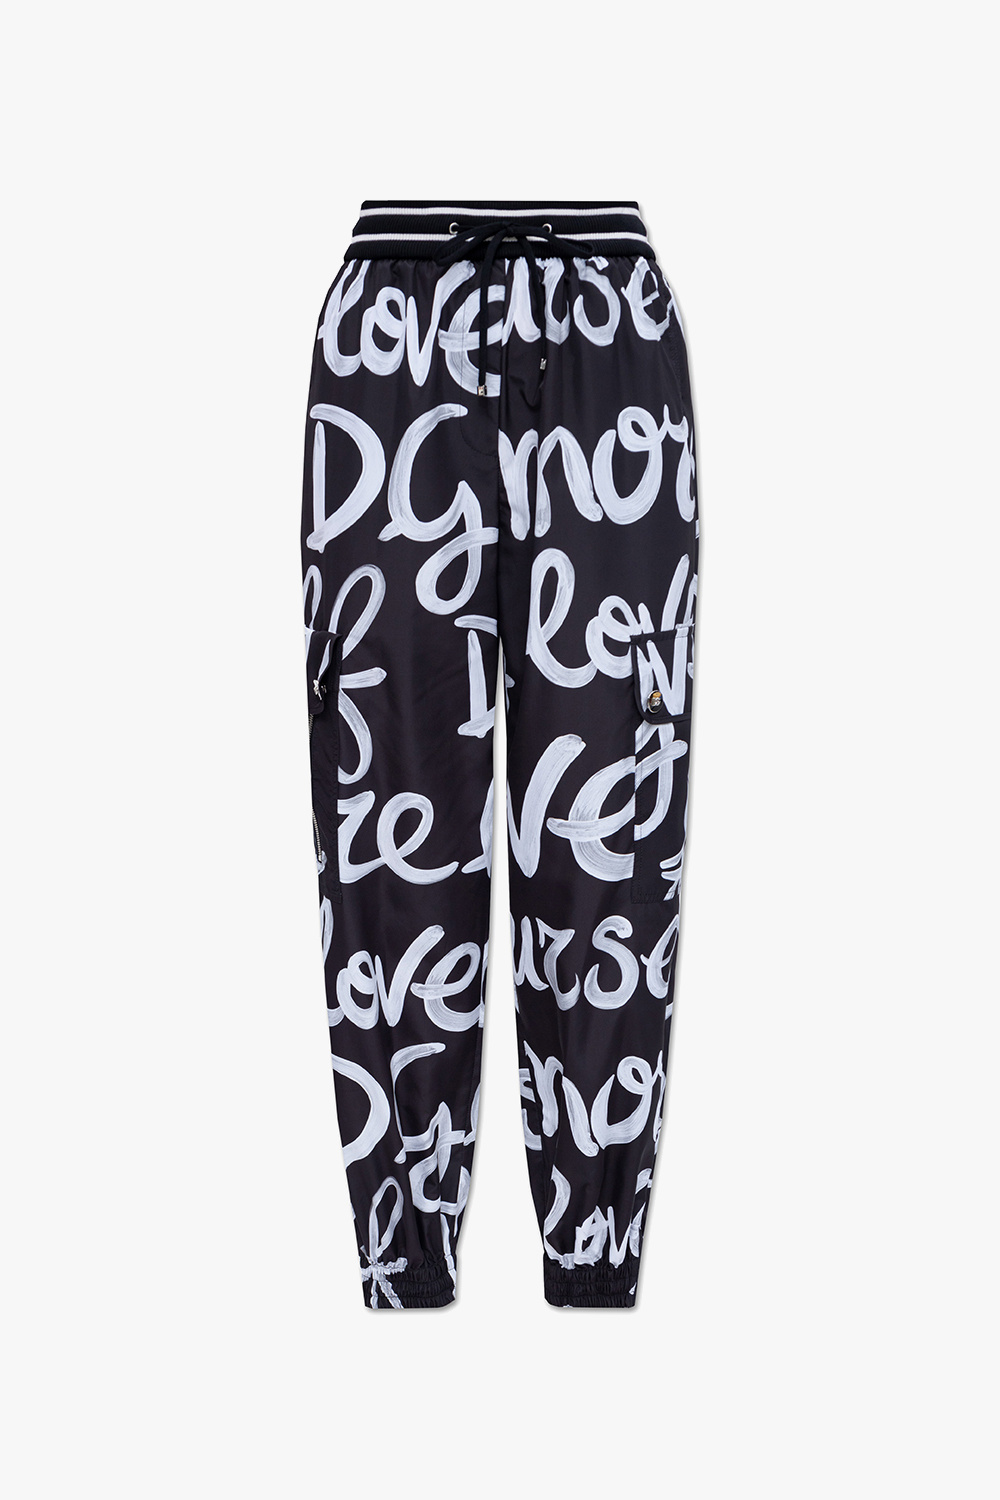 Dolce  Gabbana Mens Track Pants  Clothing  Stylicy